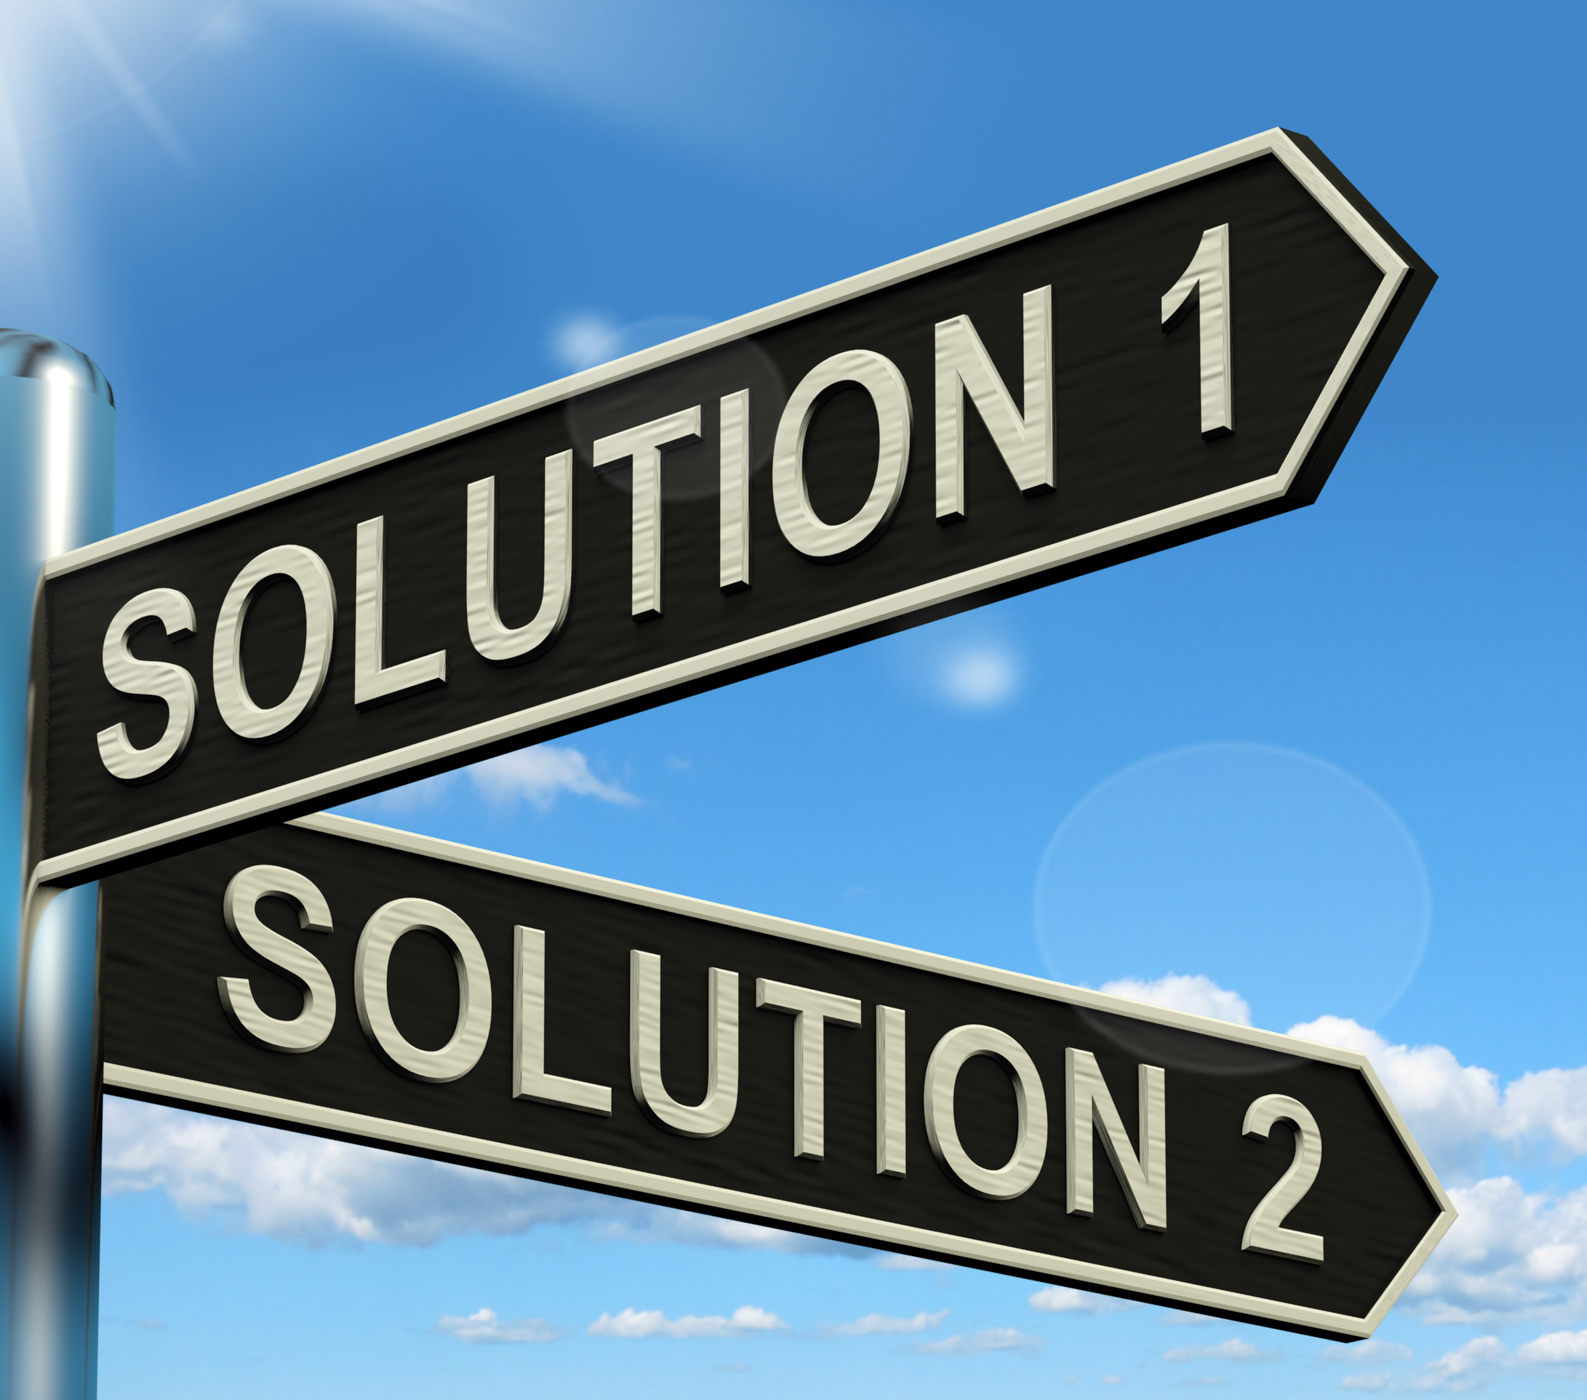 Solution 1 or 2 Choice Showing Strategy Options Or Solving, Alternative, Select, Strategy, Solving, HQ Photo